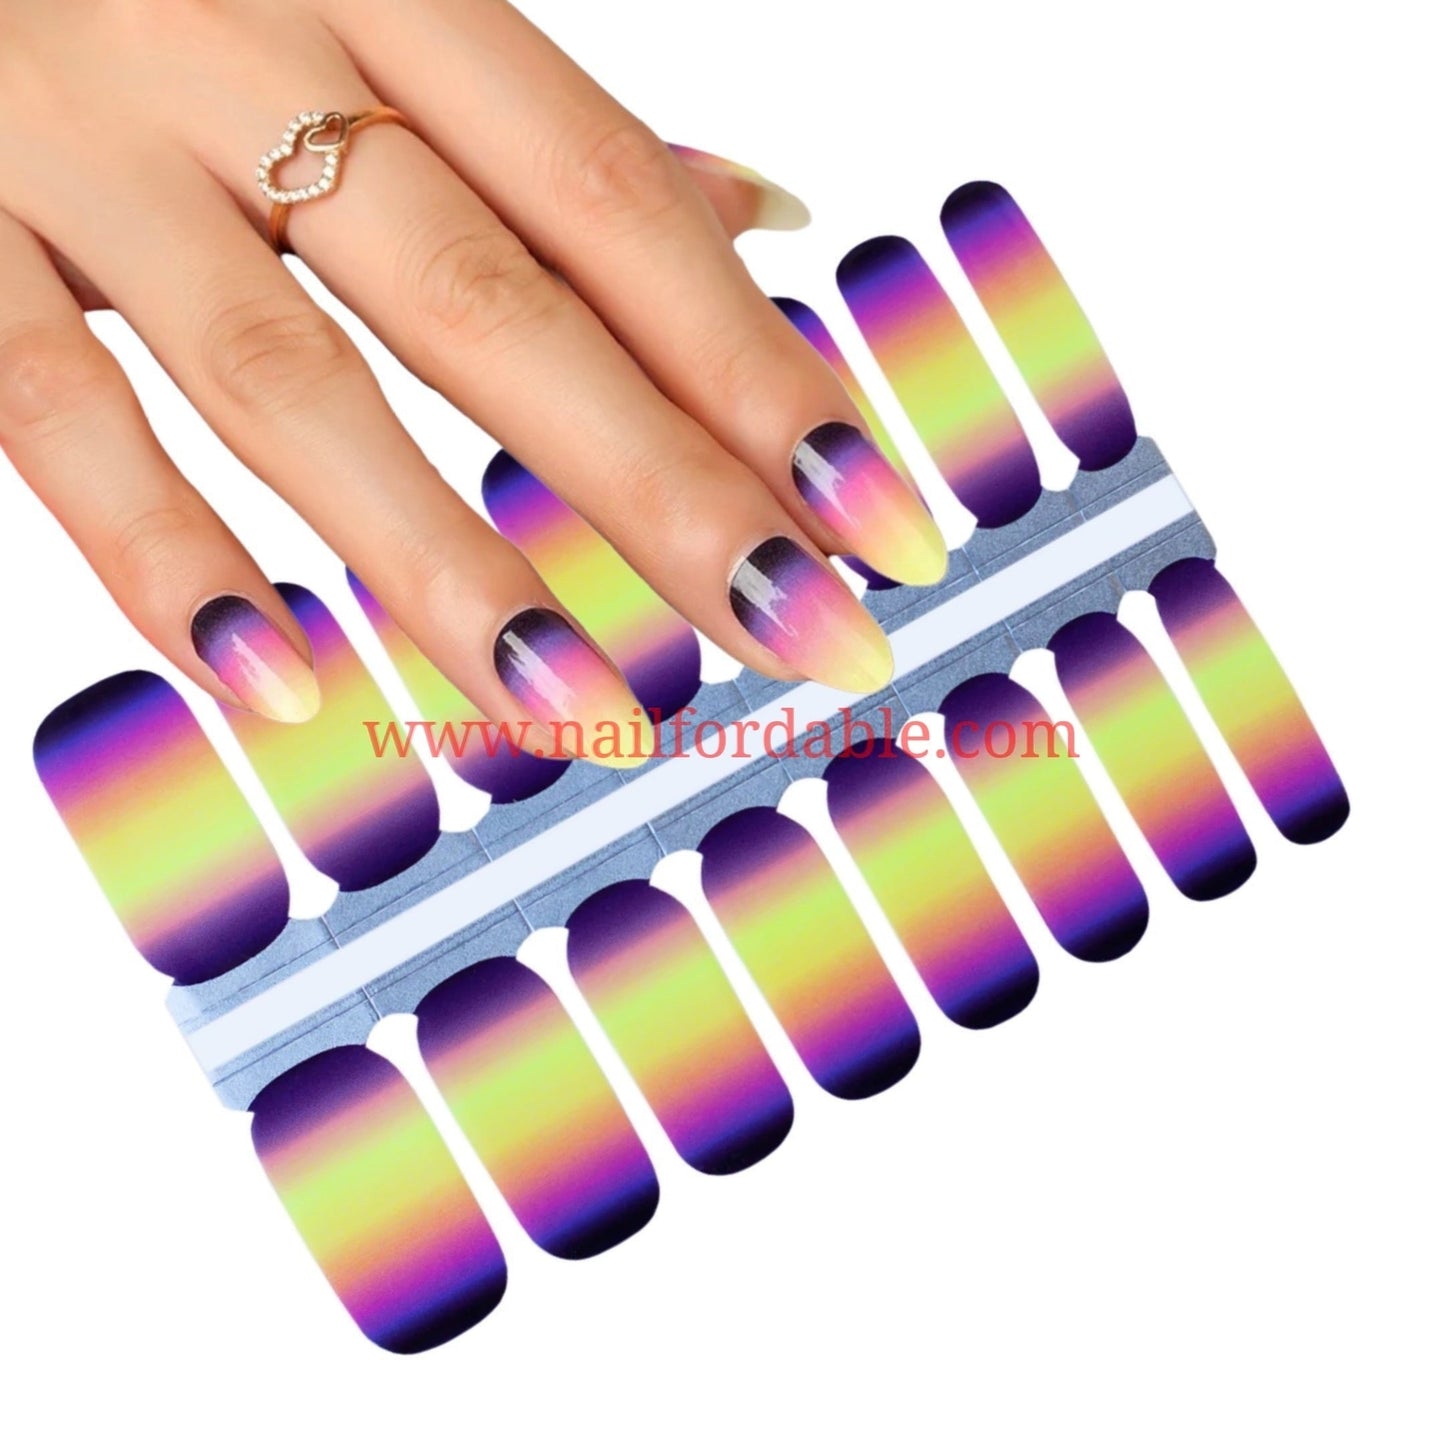 Multicolor sunset Nail Wraps | Semi Cured Gel Wraps | Gel Nail Wraps |Nail Polish | Nail Stickers